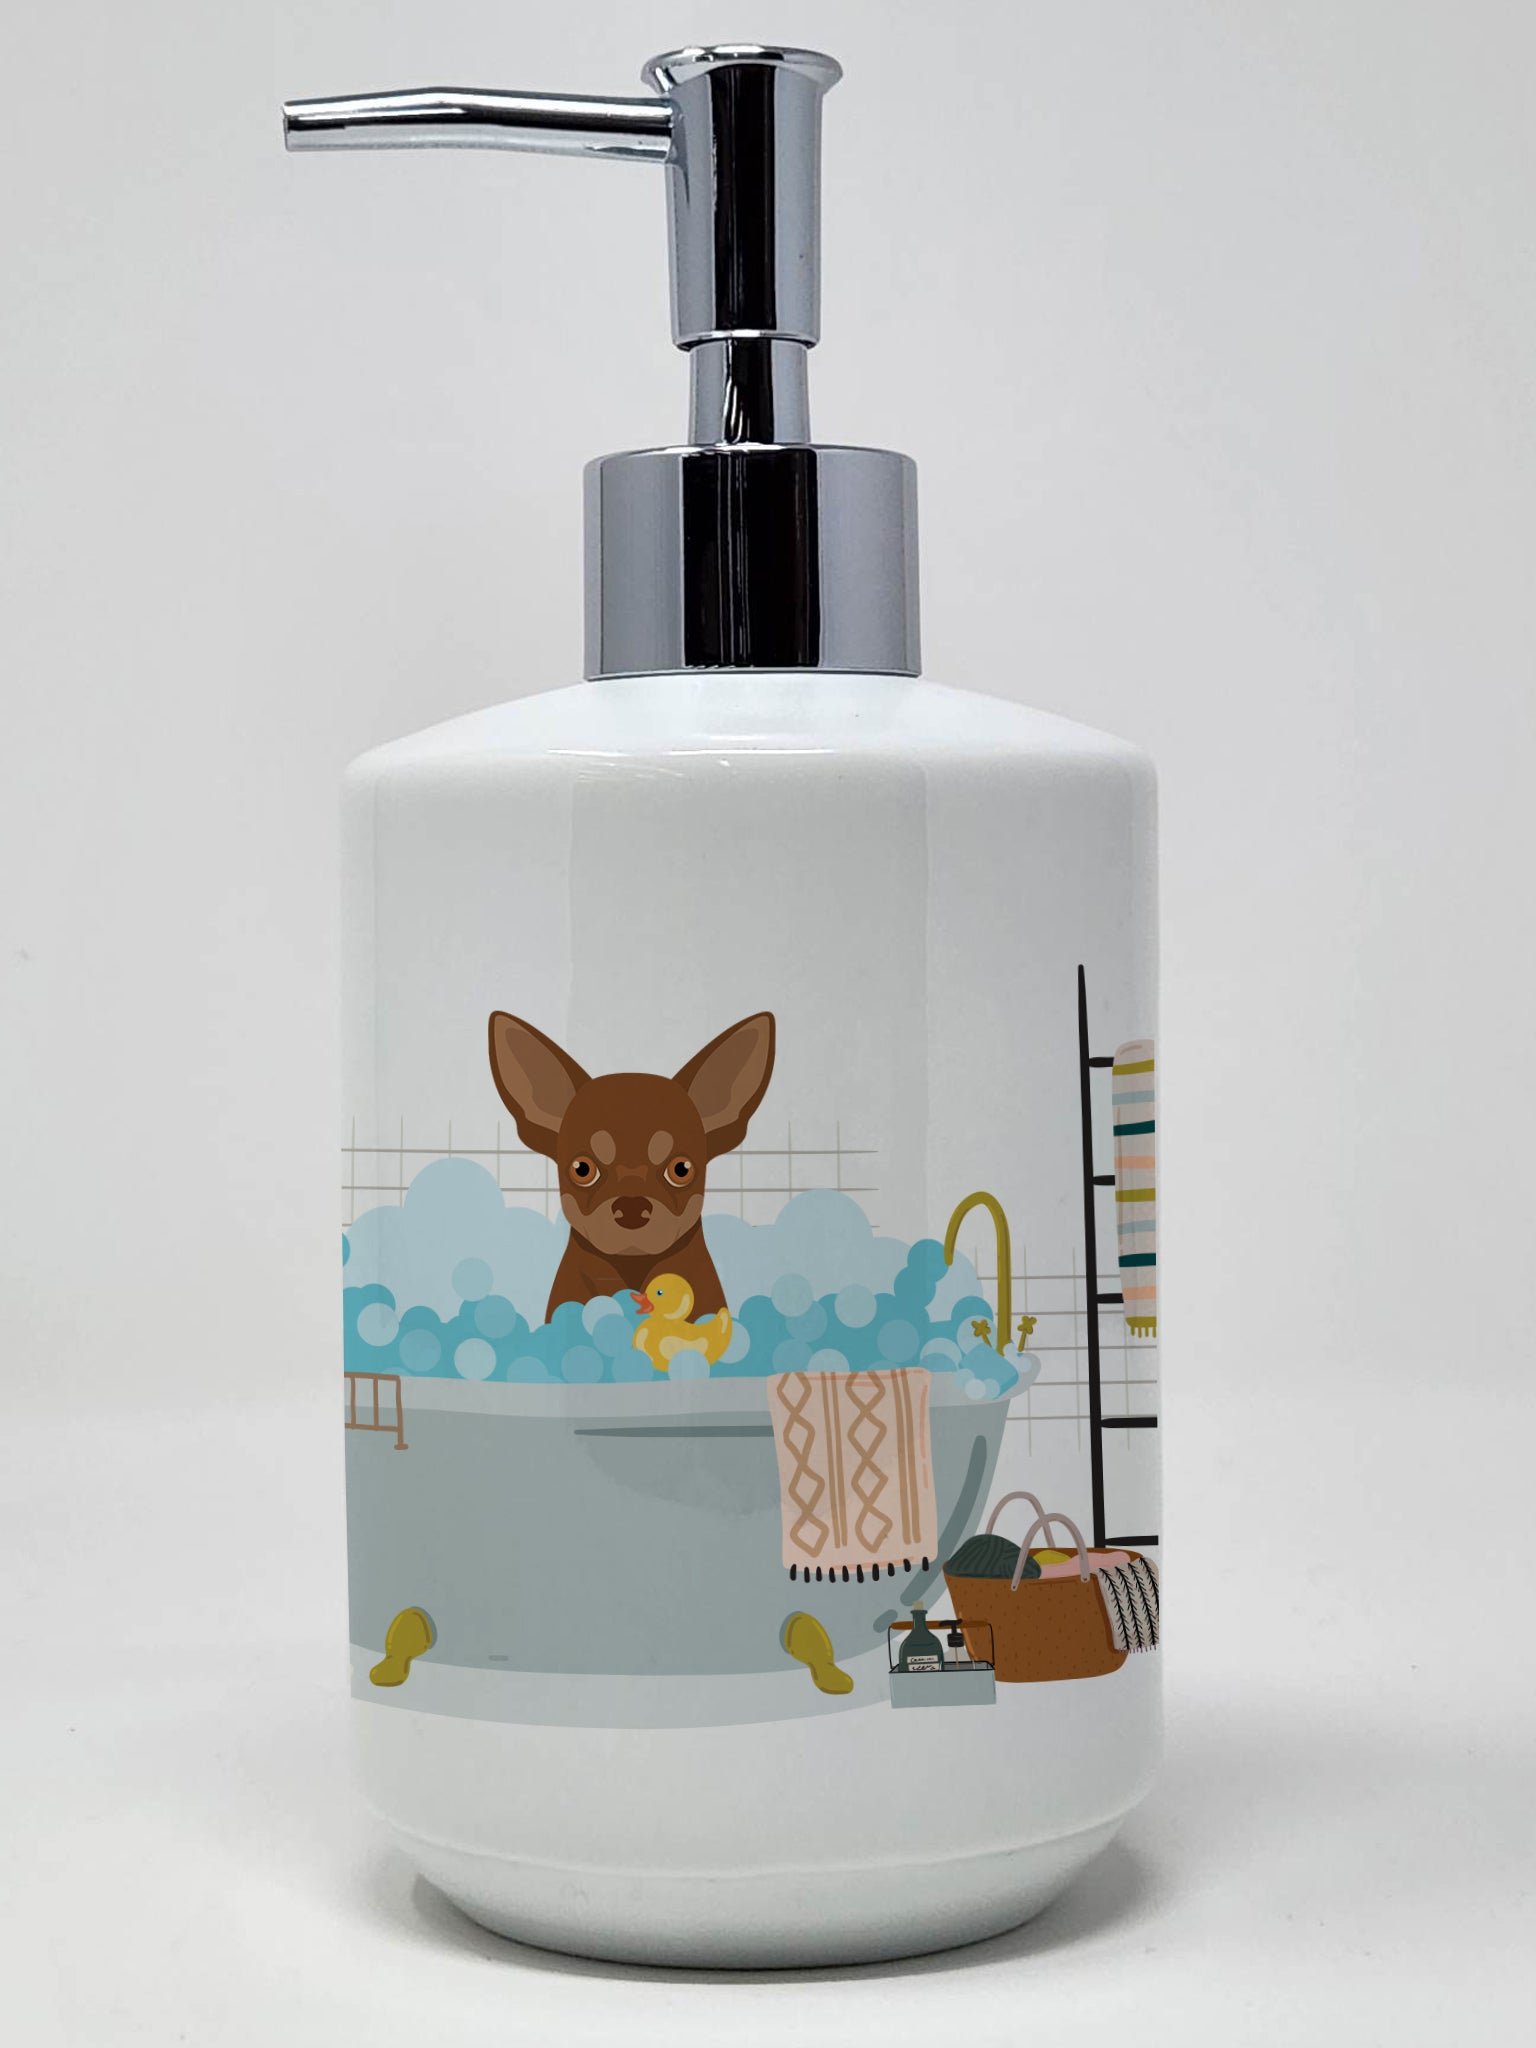 Buy this Chocolate and Tan Chihuahua Ceramic Soap Dispenser